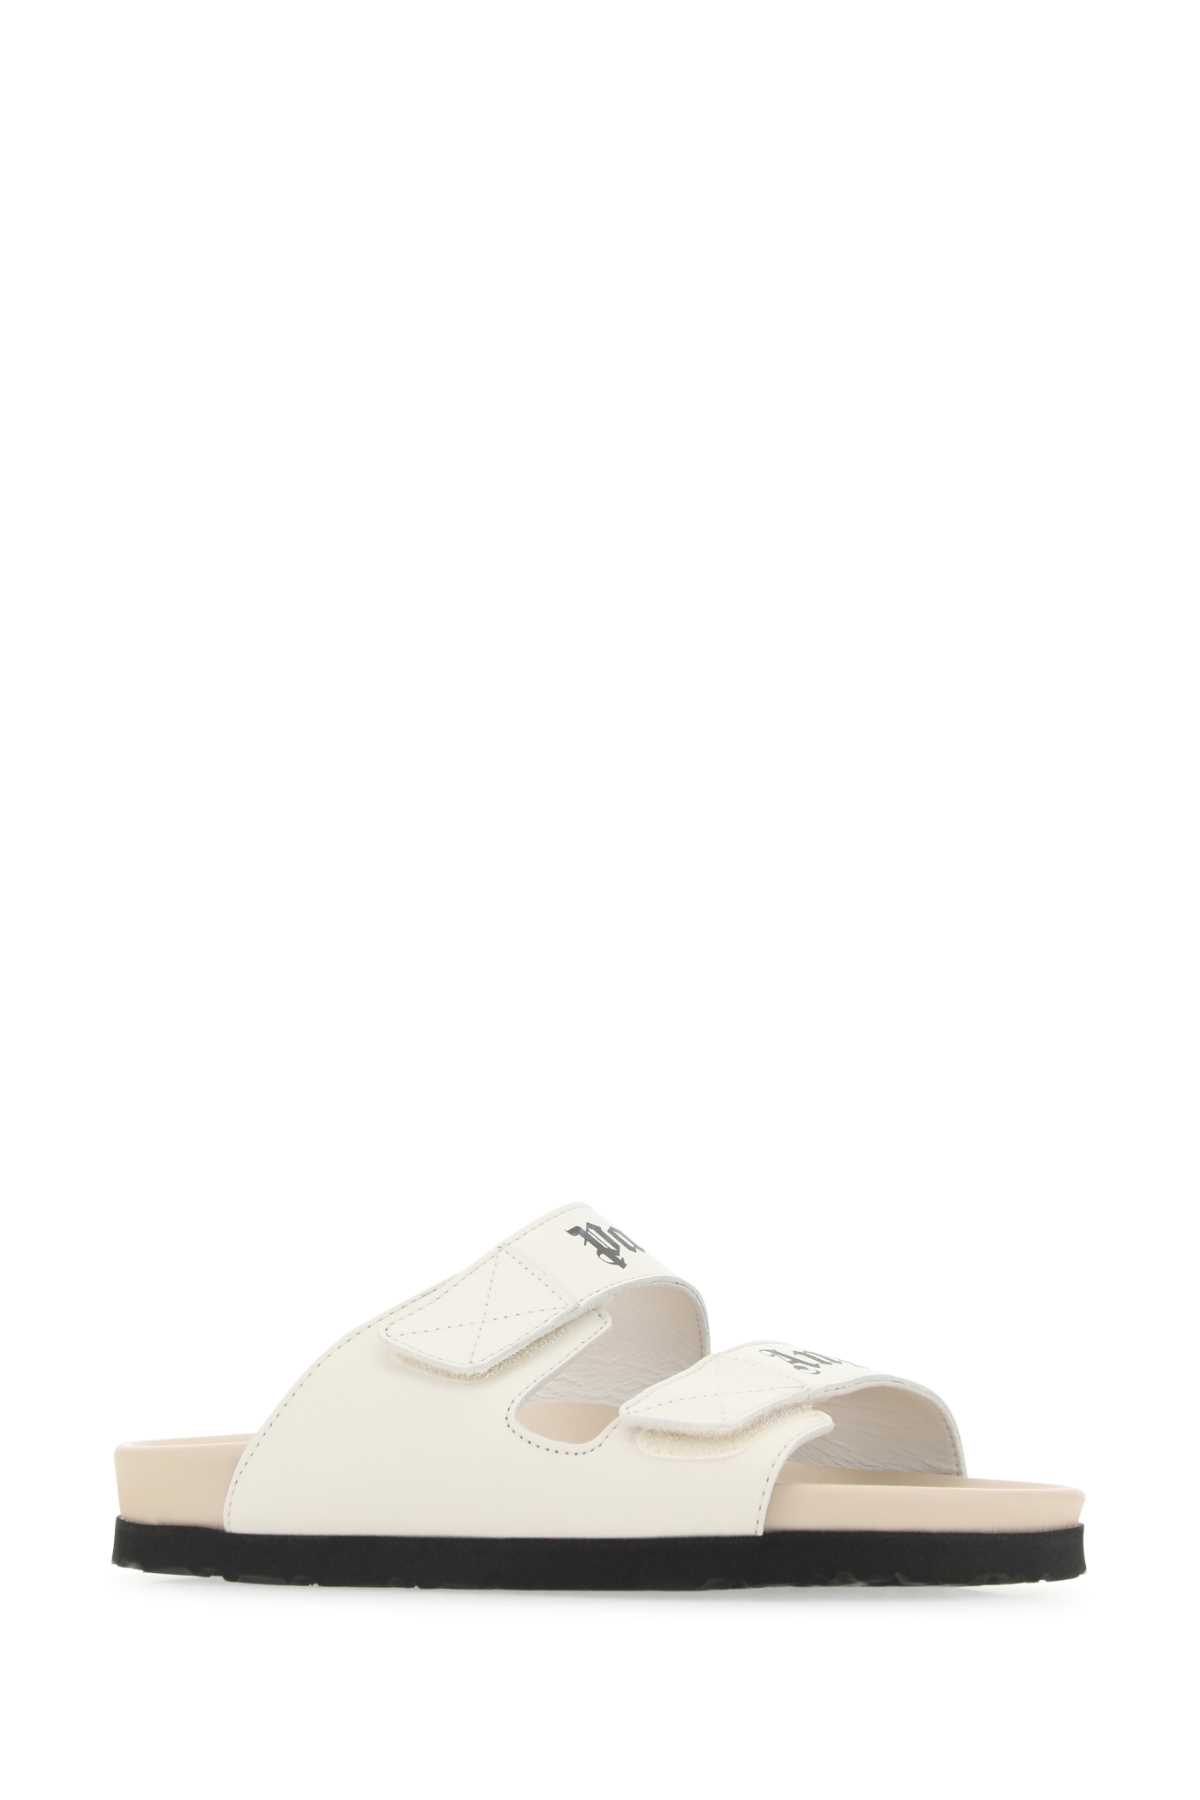 Palm Angels Ivory Leather Slippers In Offwhitebeige